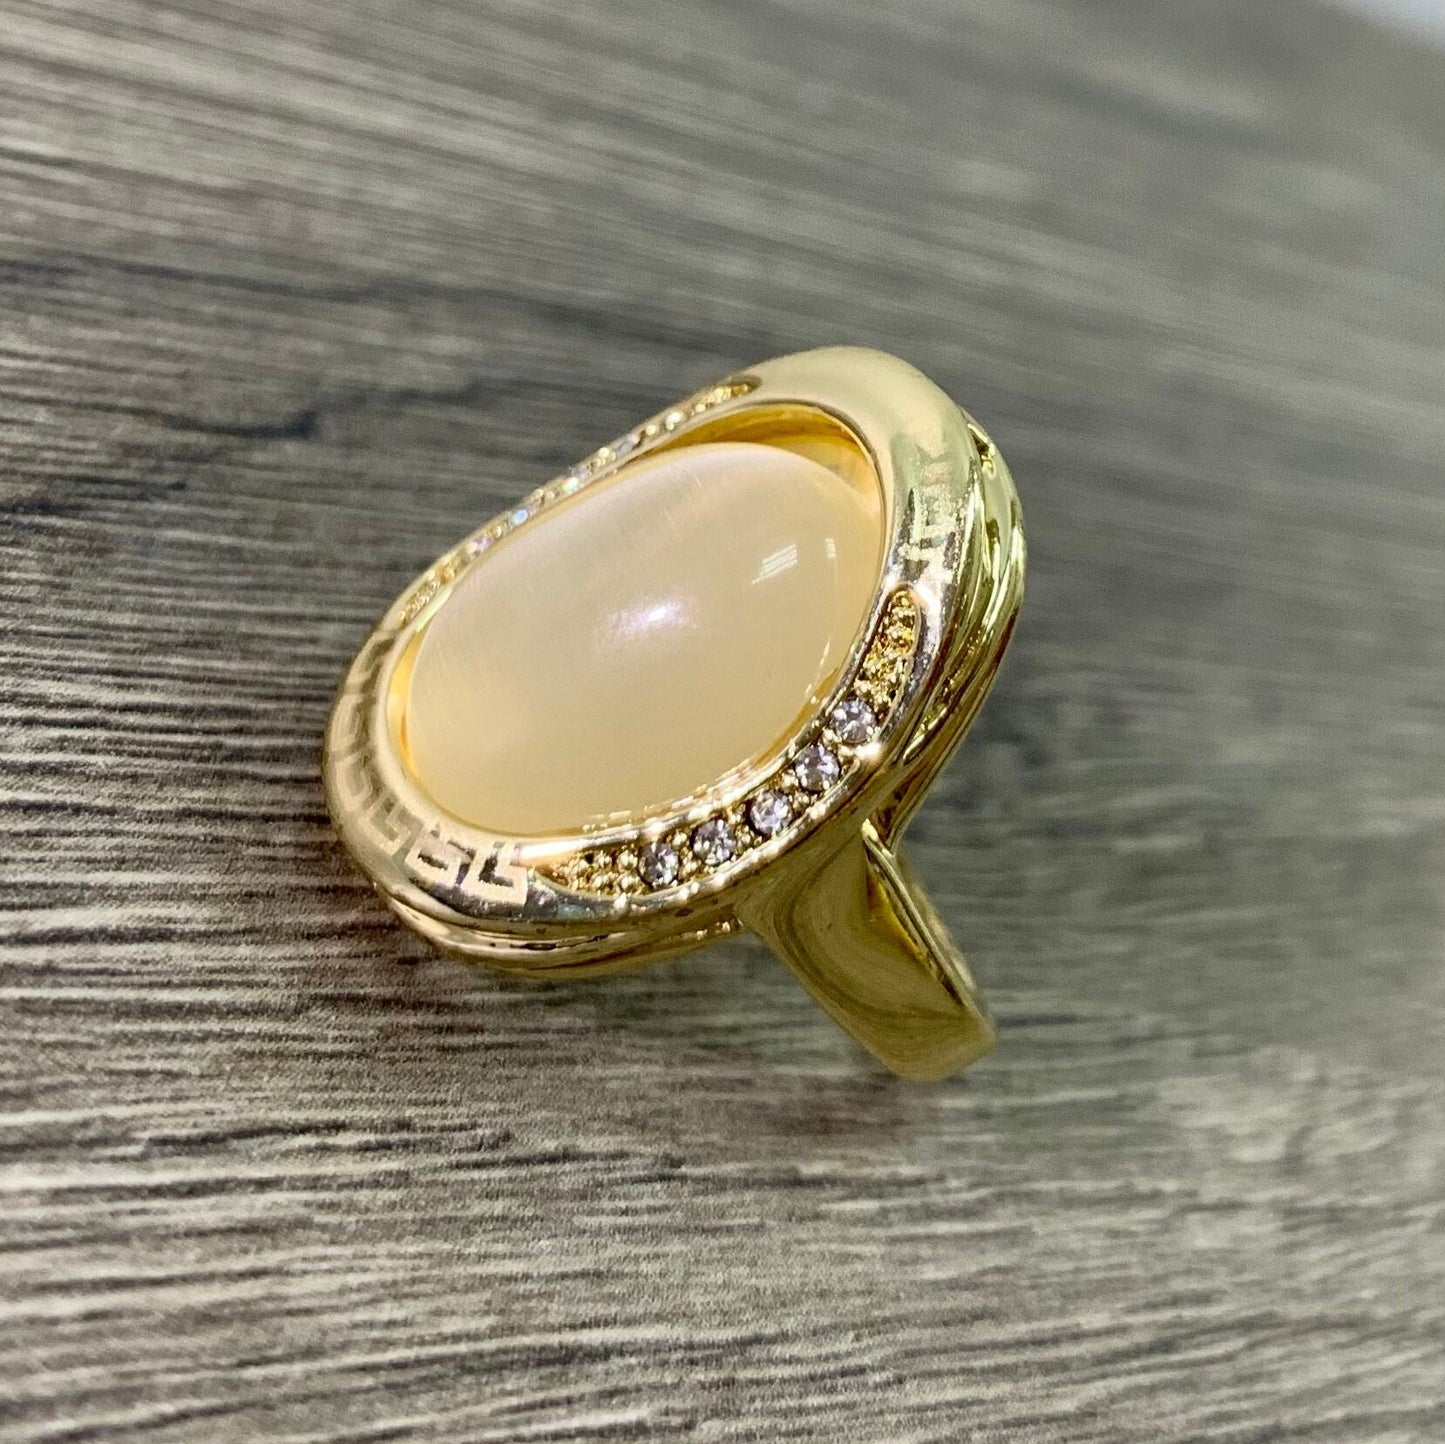 18k Gold Filled Semi Precious Oval Ring Featuring Simulated Quartz Stone And Quality Cubic Zirconia Wholesale Jewelry Supplies